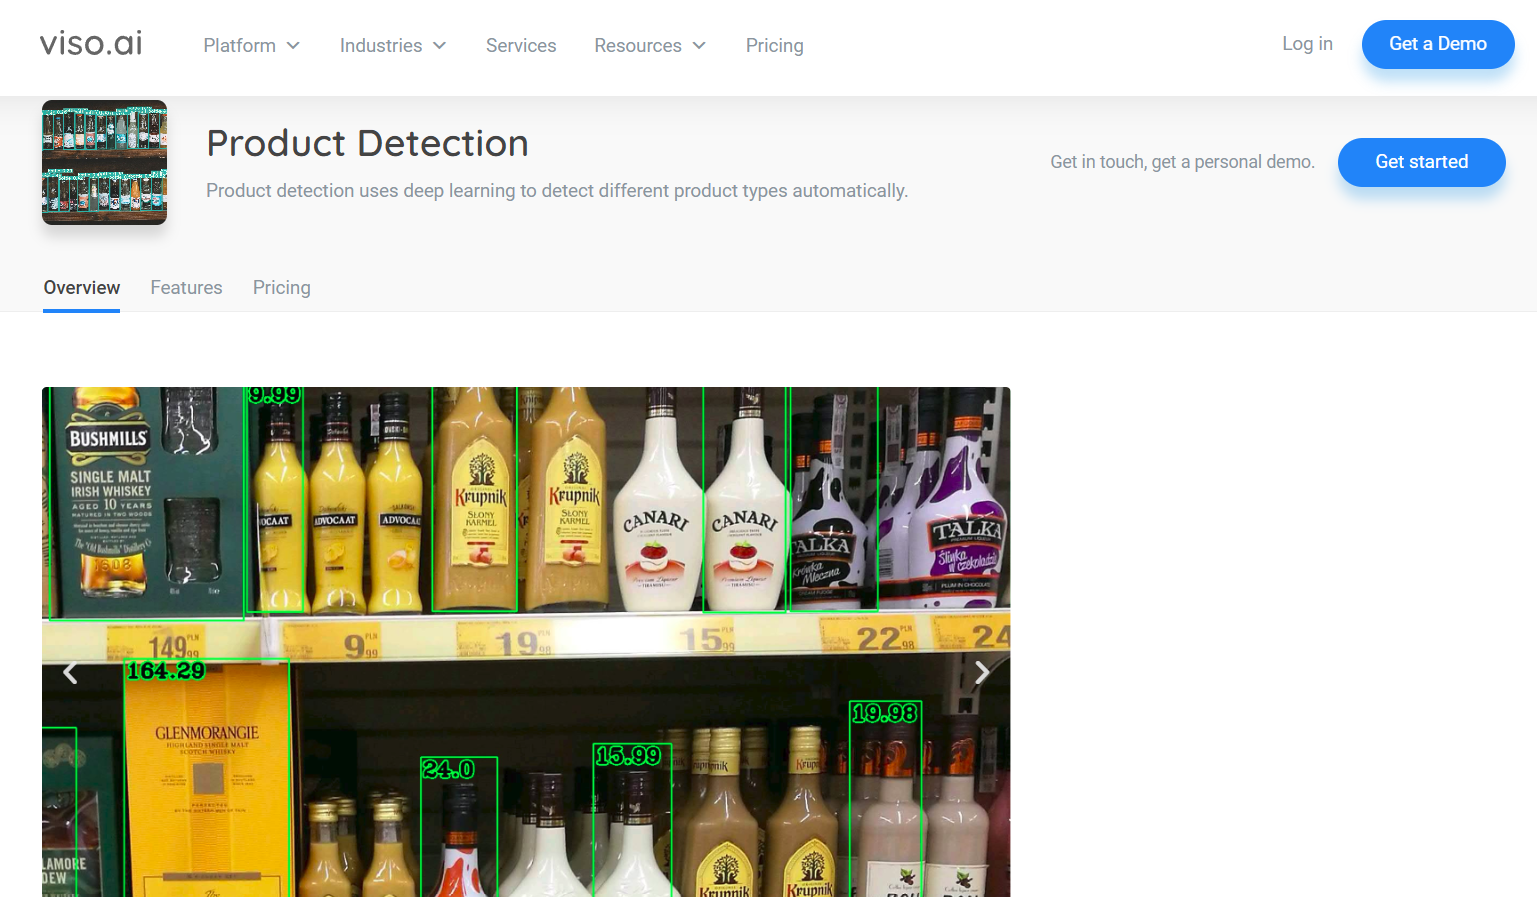 Object Detection at Viso suite